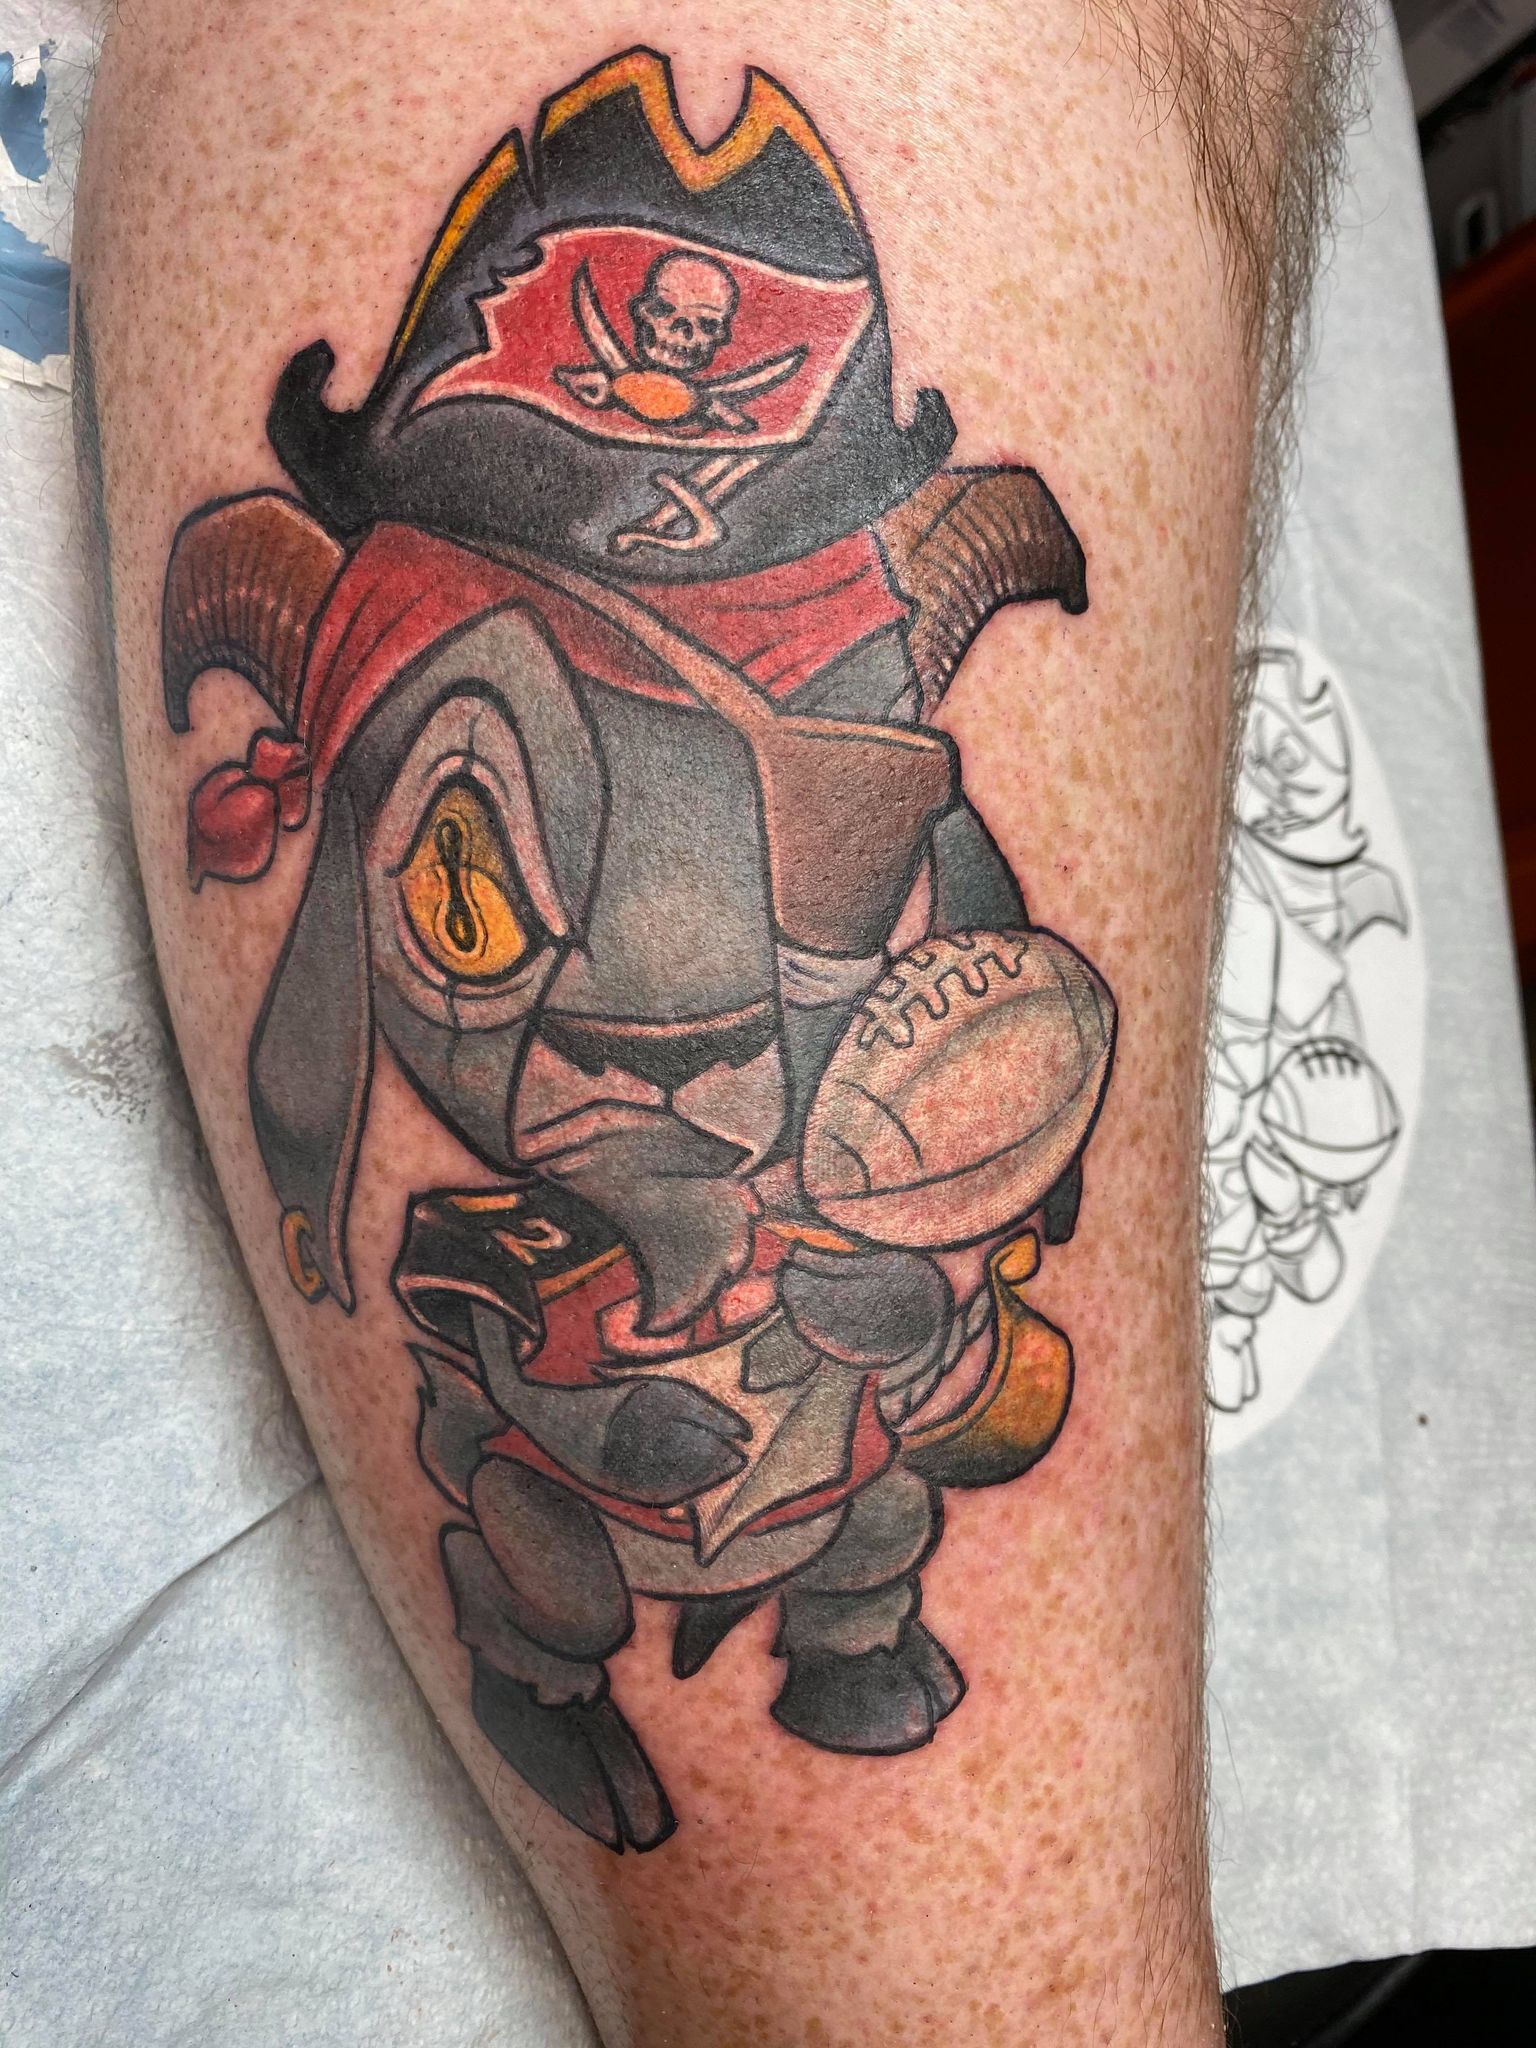 Bucs fans head to local tattoo artist to commemorate Super Bowl 55 win